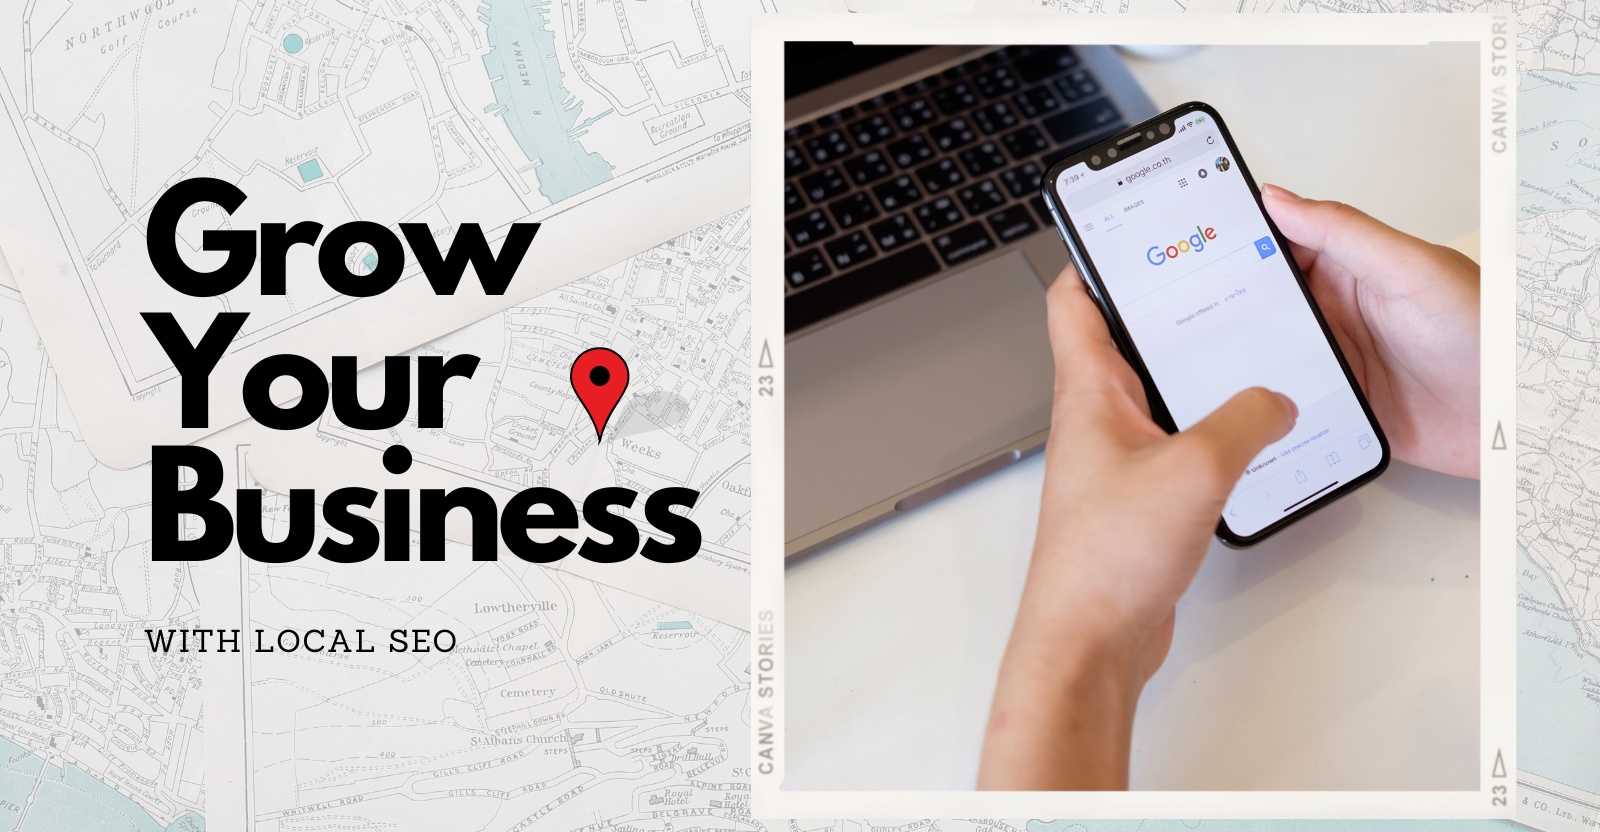 Local SEO to grow local business